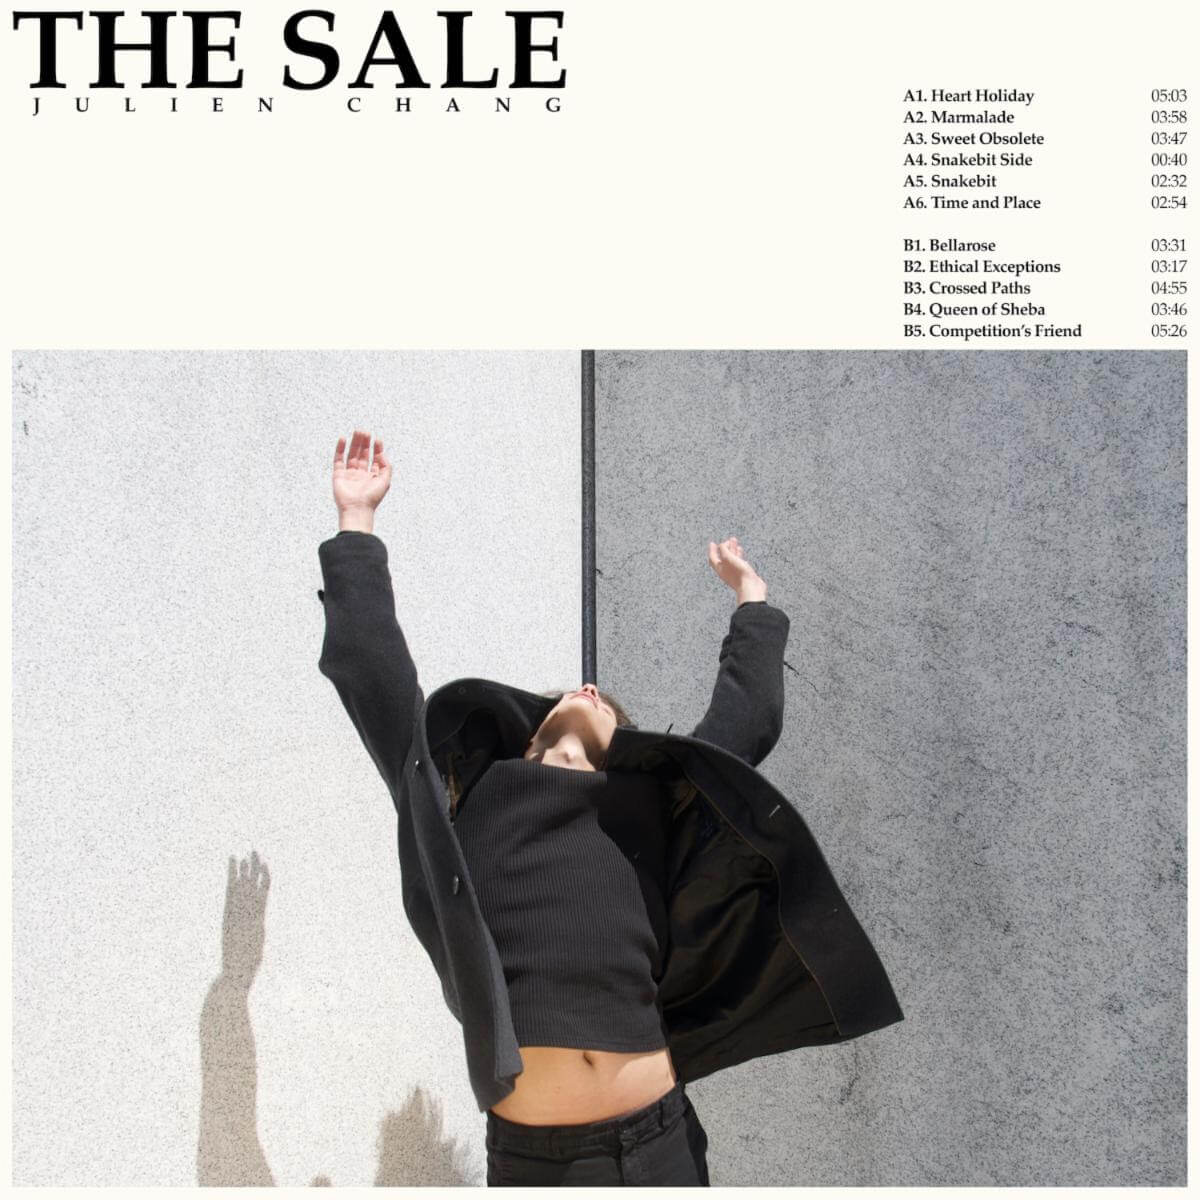 Singer/songwriter Julien Chang will release his new album The Sale on November 4, via Transgressive Records